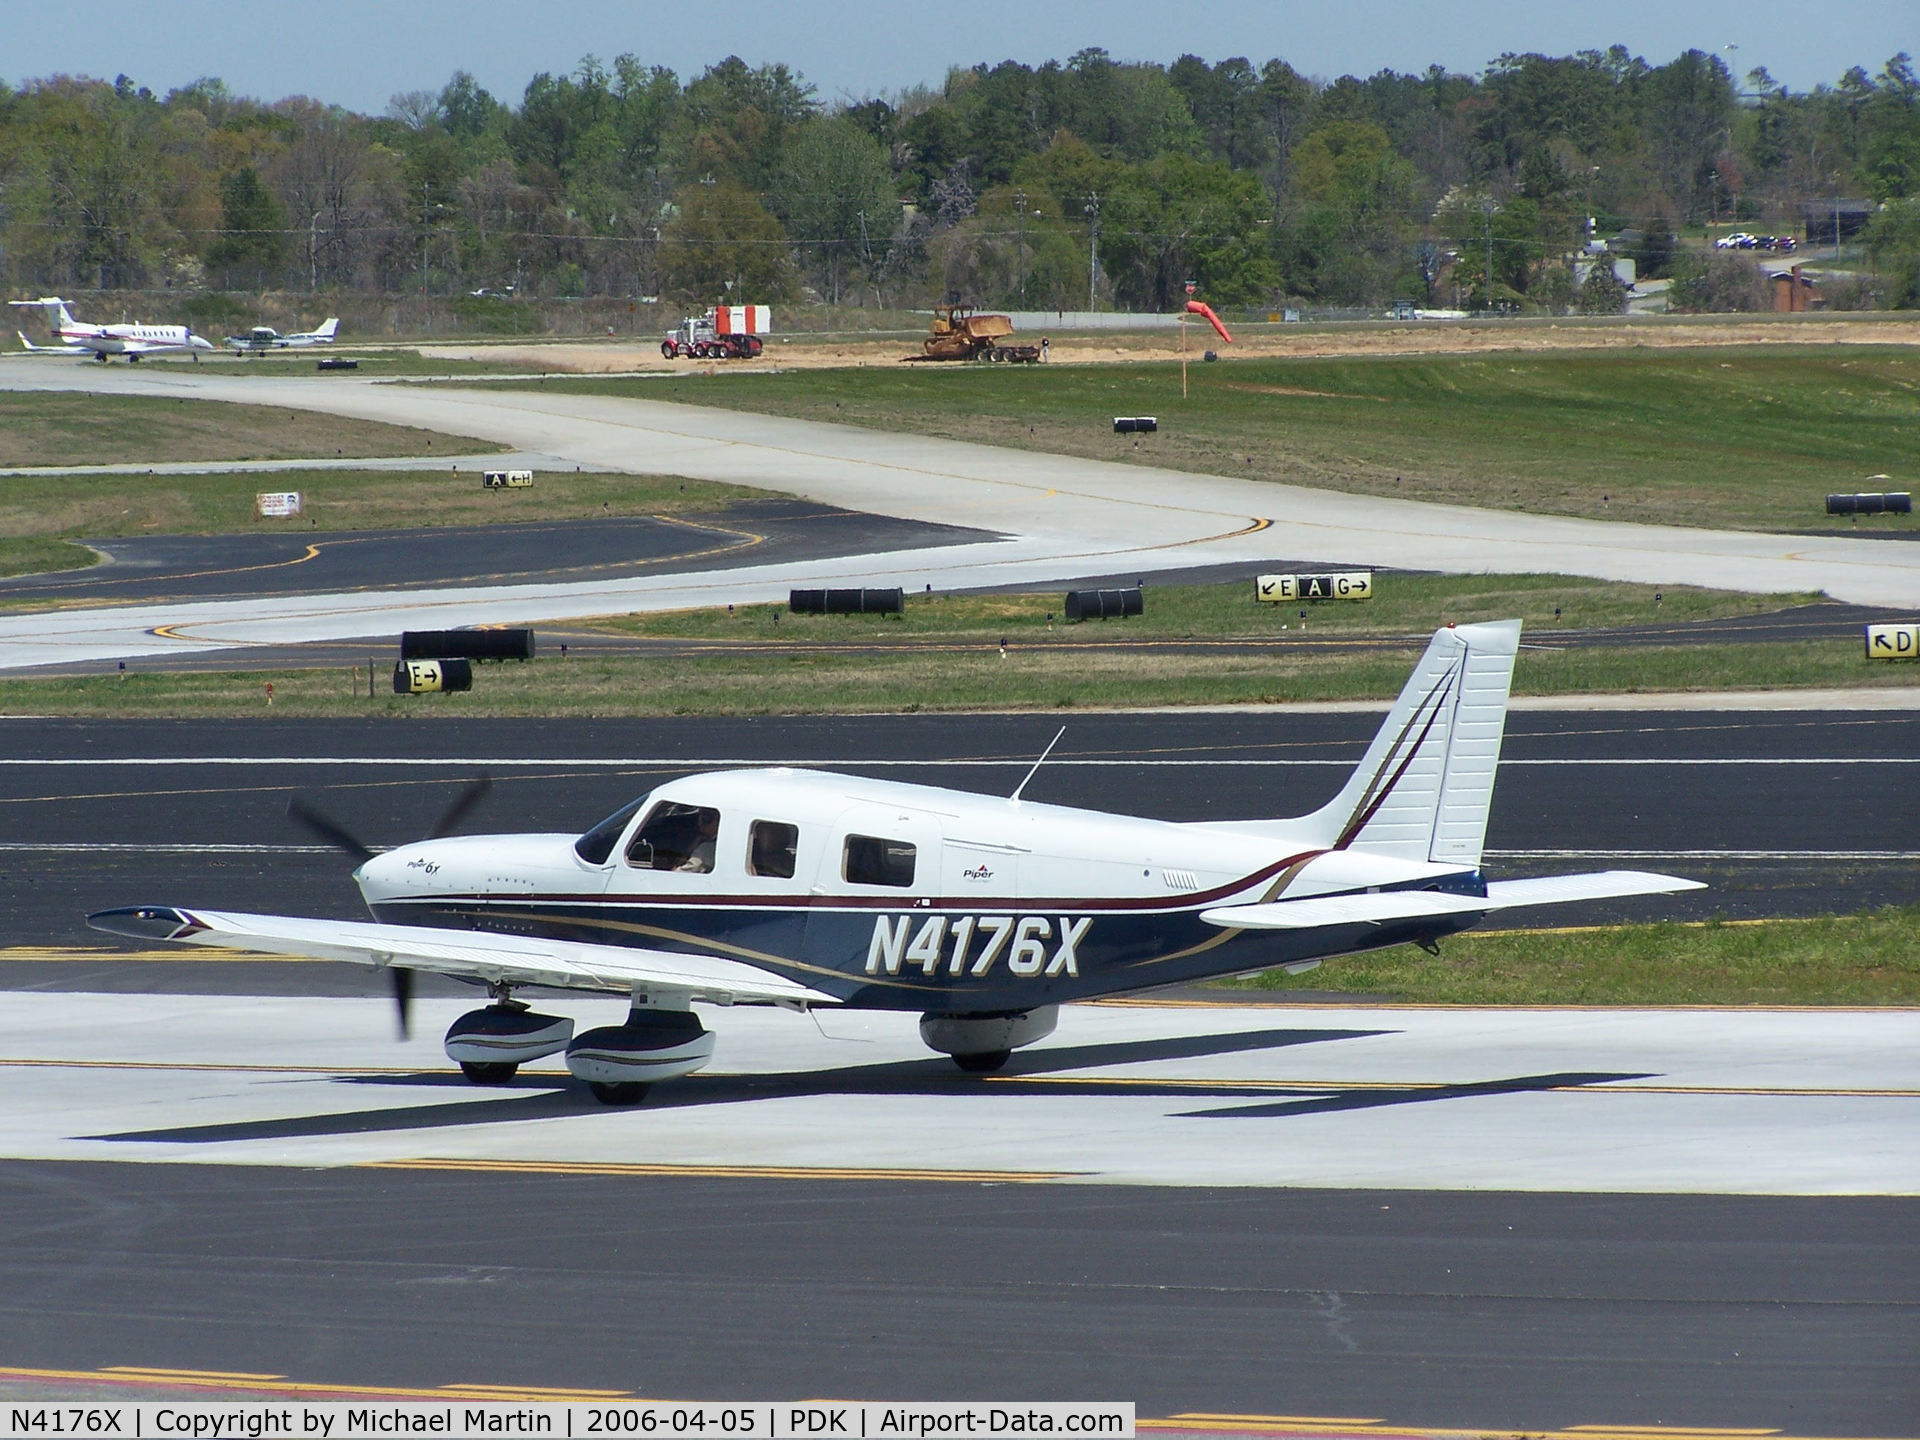 N4176X, 2003 Piper PA-32-301FT Saratoga C/N 3232013, Taxing back from flight